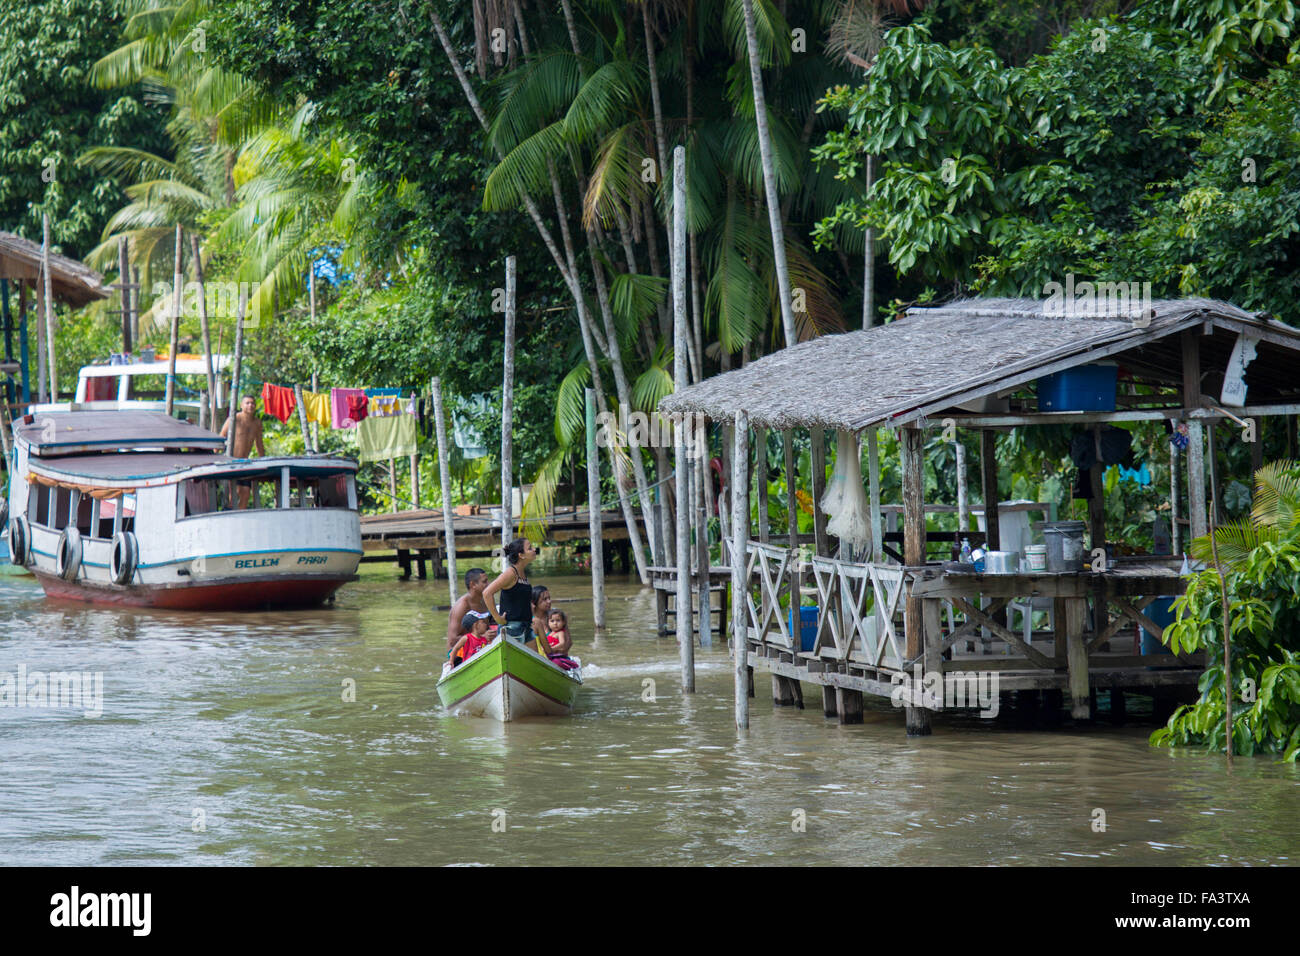 A traditional boat and river house on a creek in the Brazilian Amazon Stock Photo